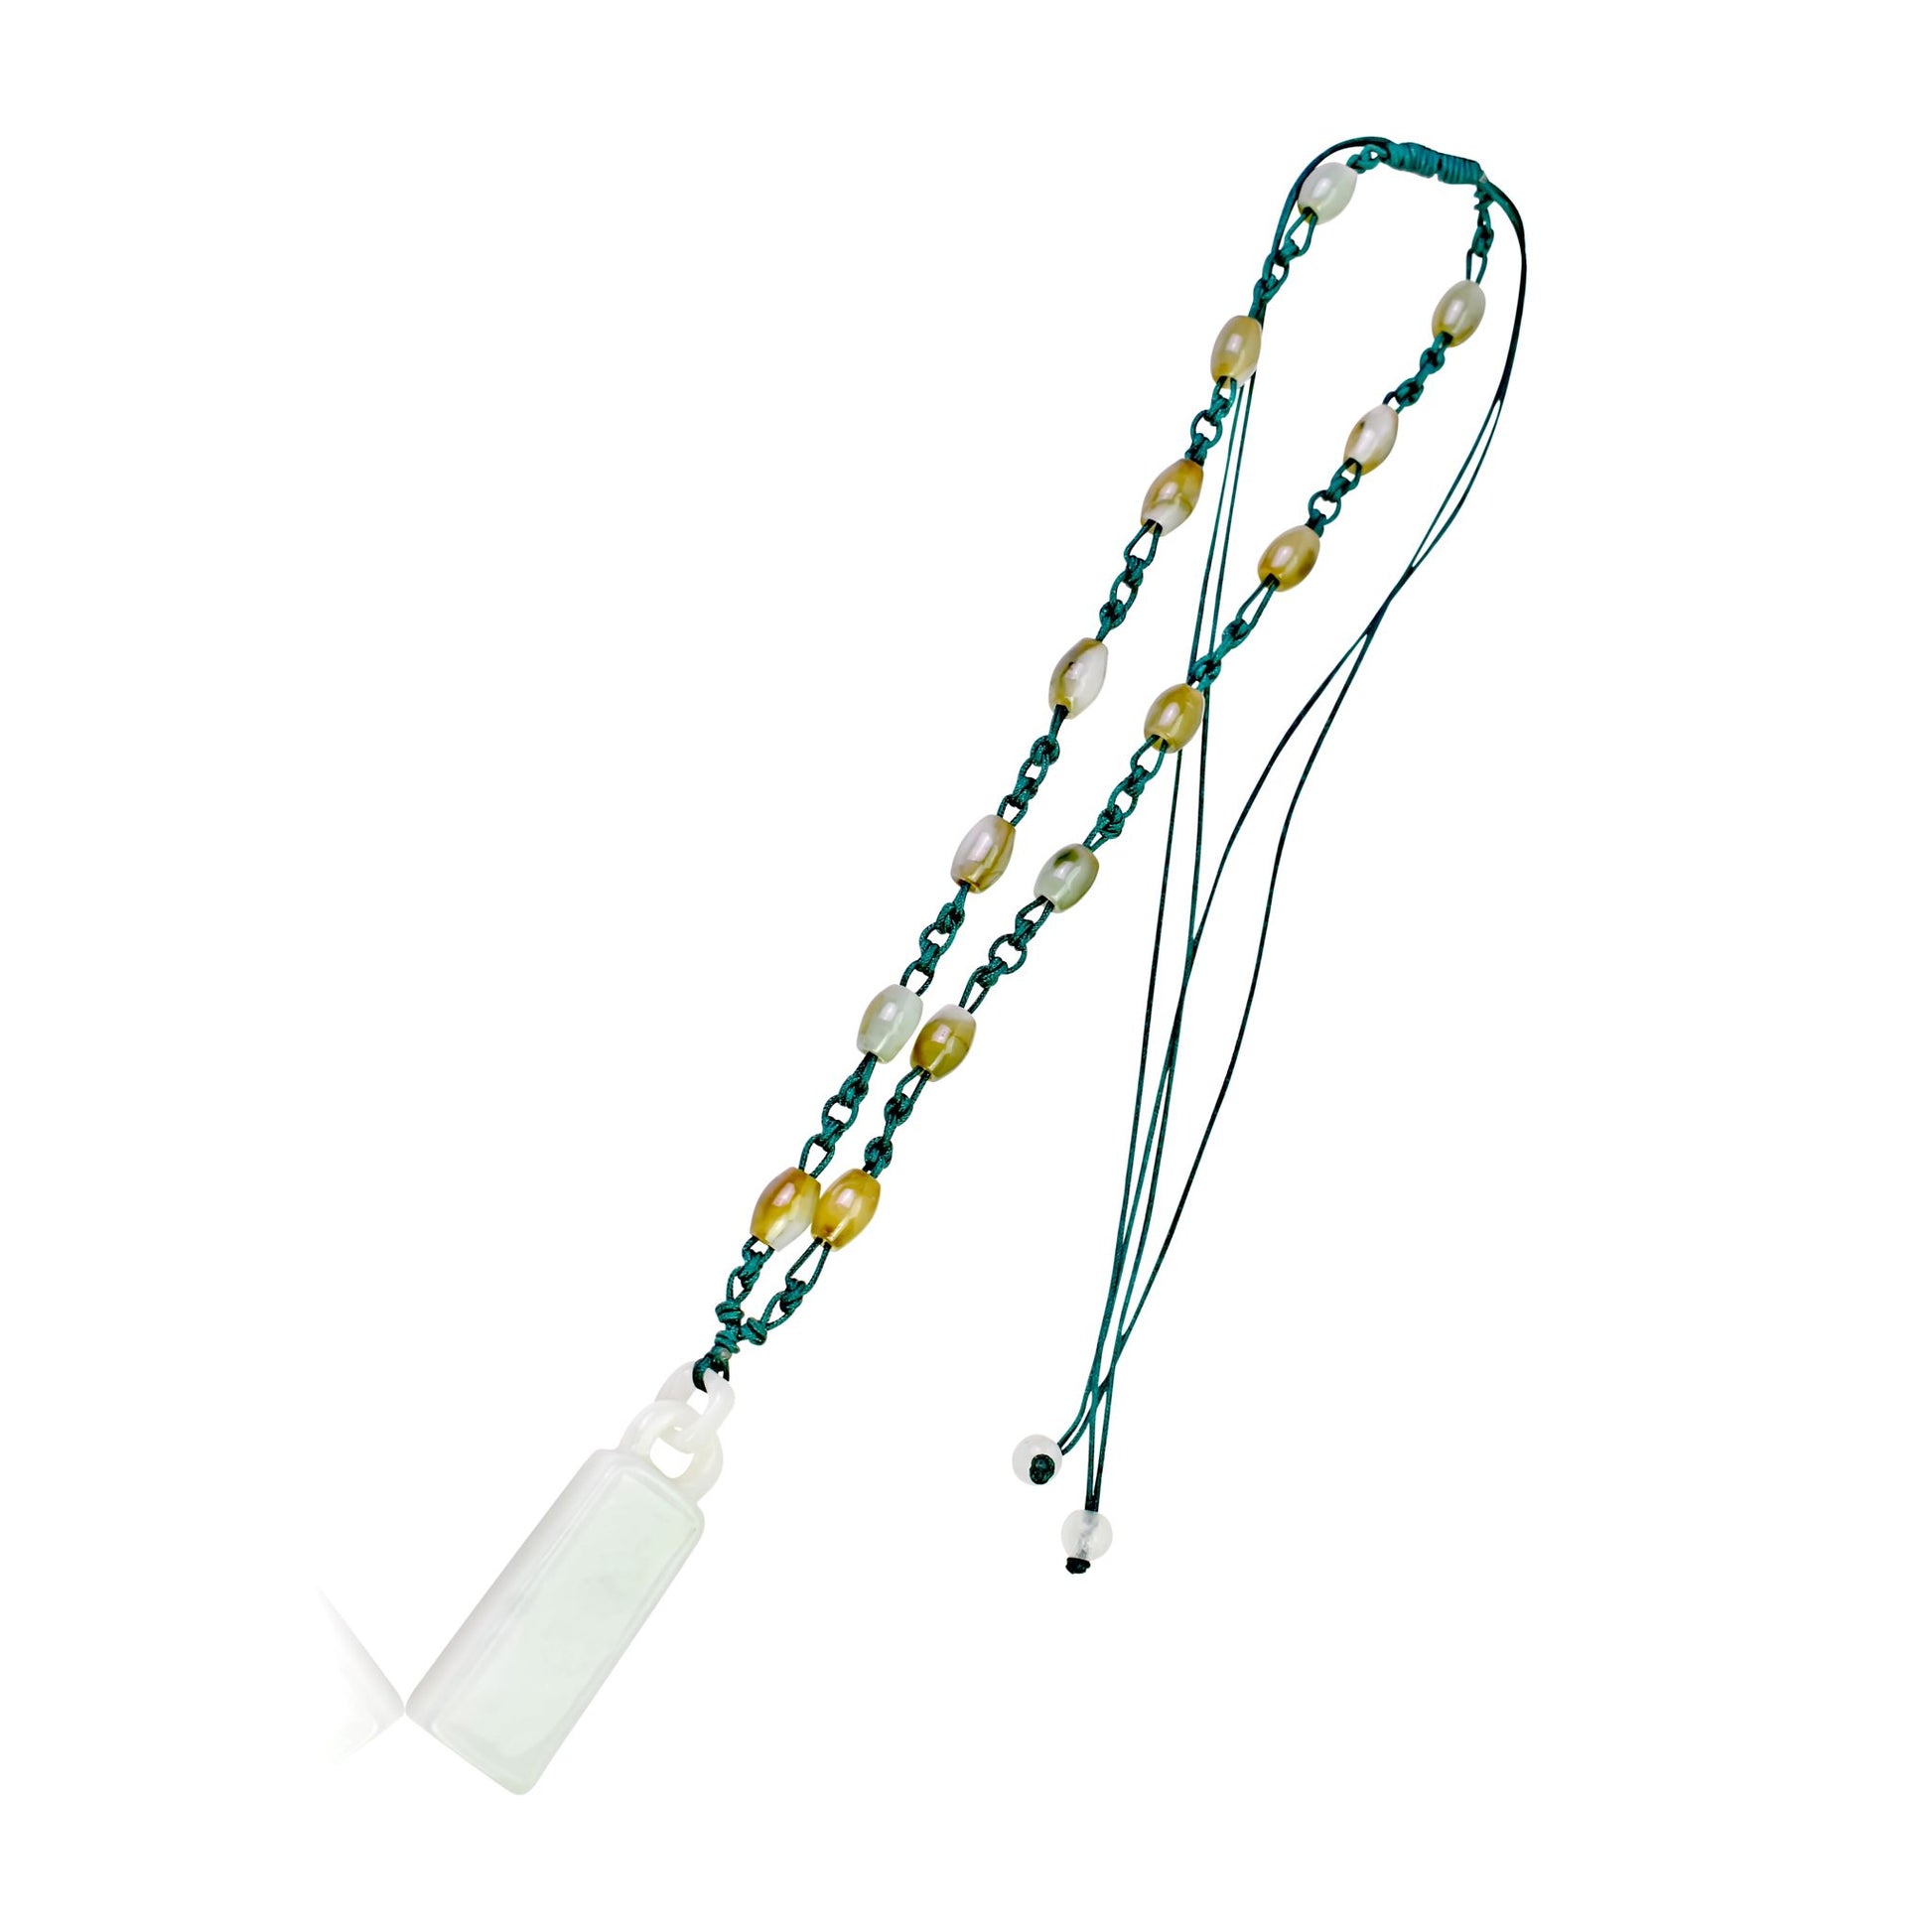 Add Stability to your Life with the Bar Jade Pendant Necklace made with Green Cord